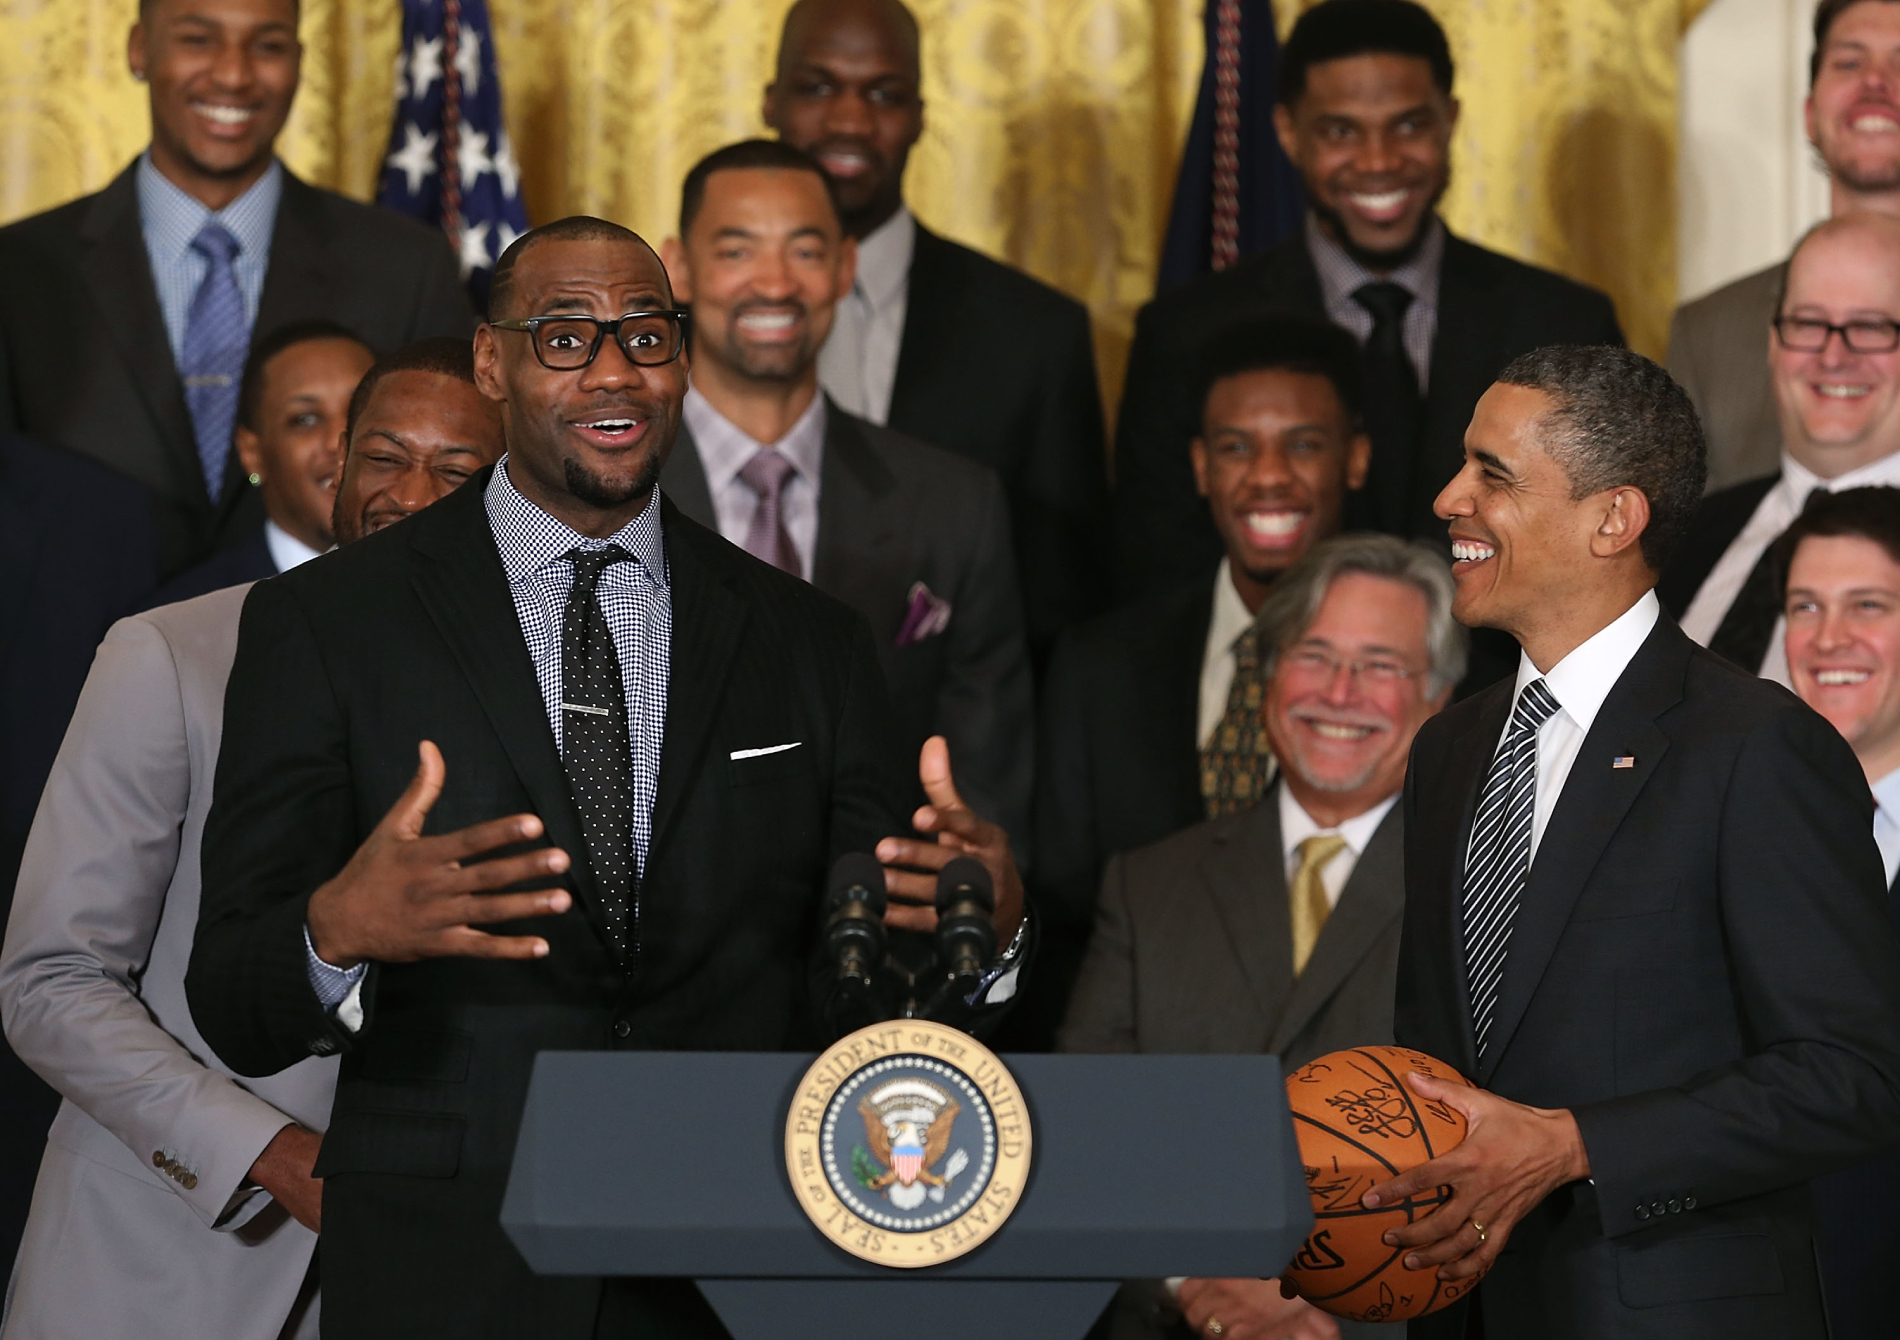 When LeBron James and the Lakers just won the Finals, Barack Obama congratulated them, while Donald Trump continued to bash the NBA.